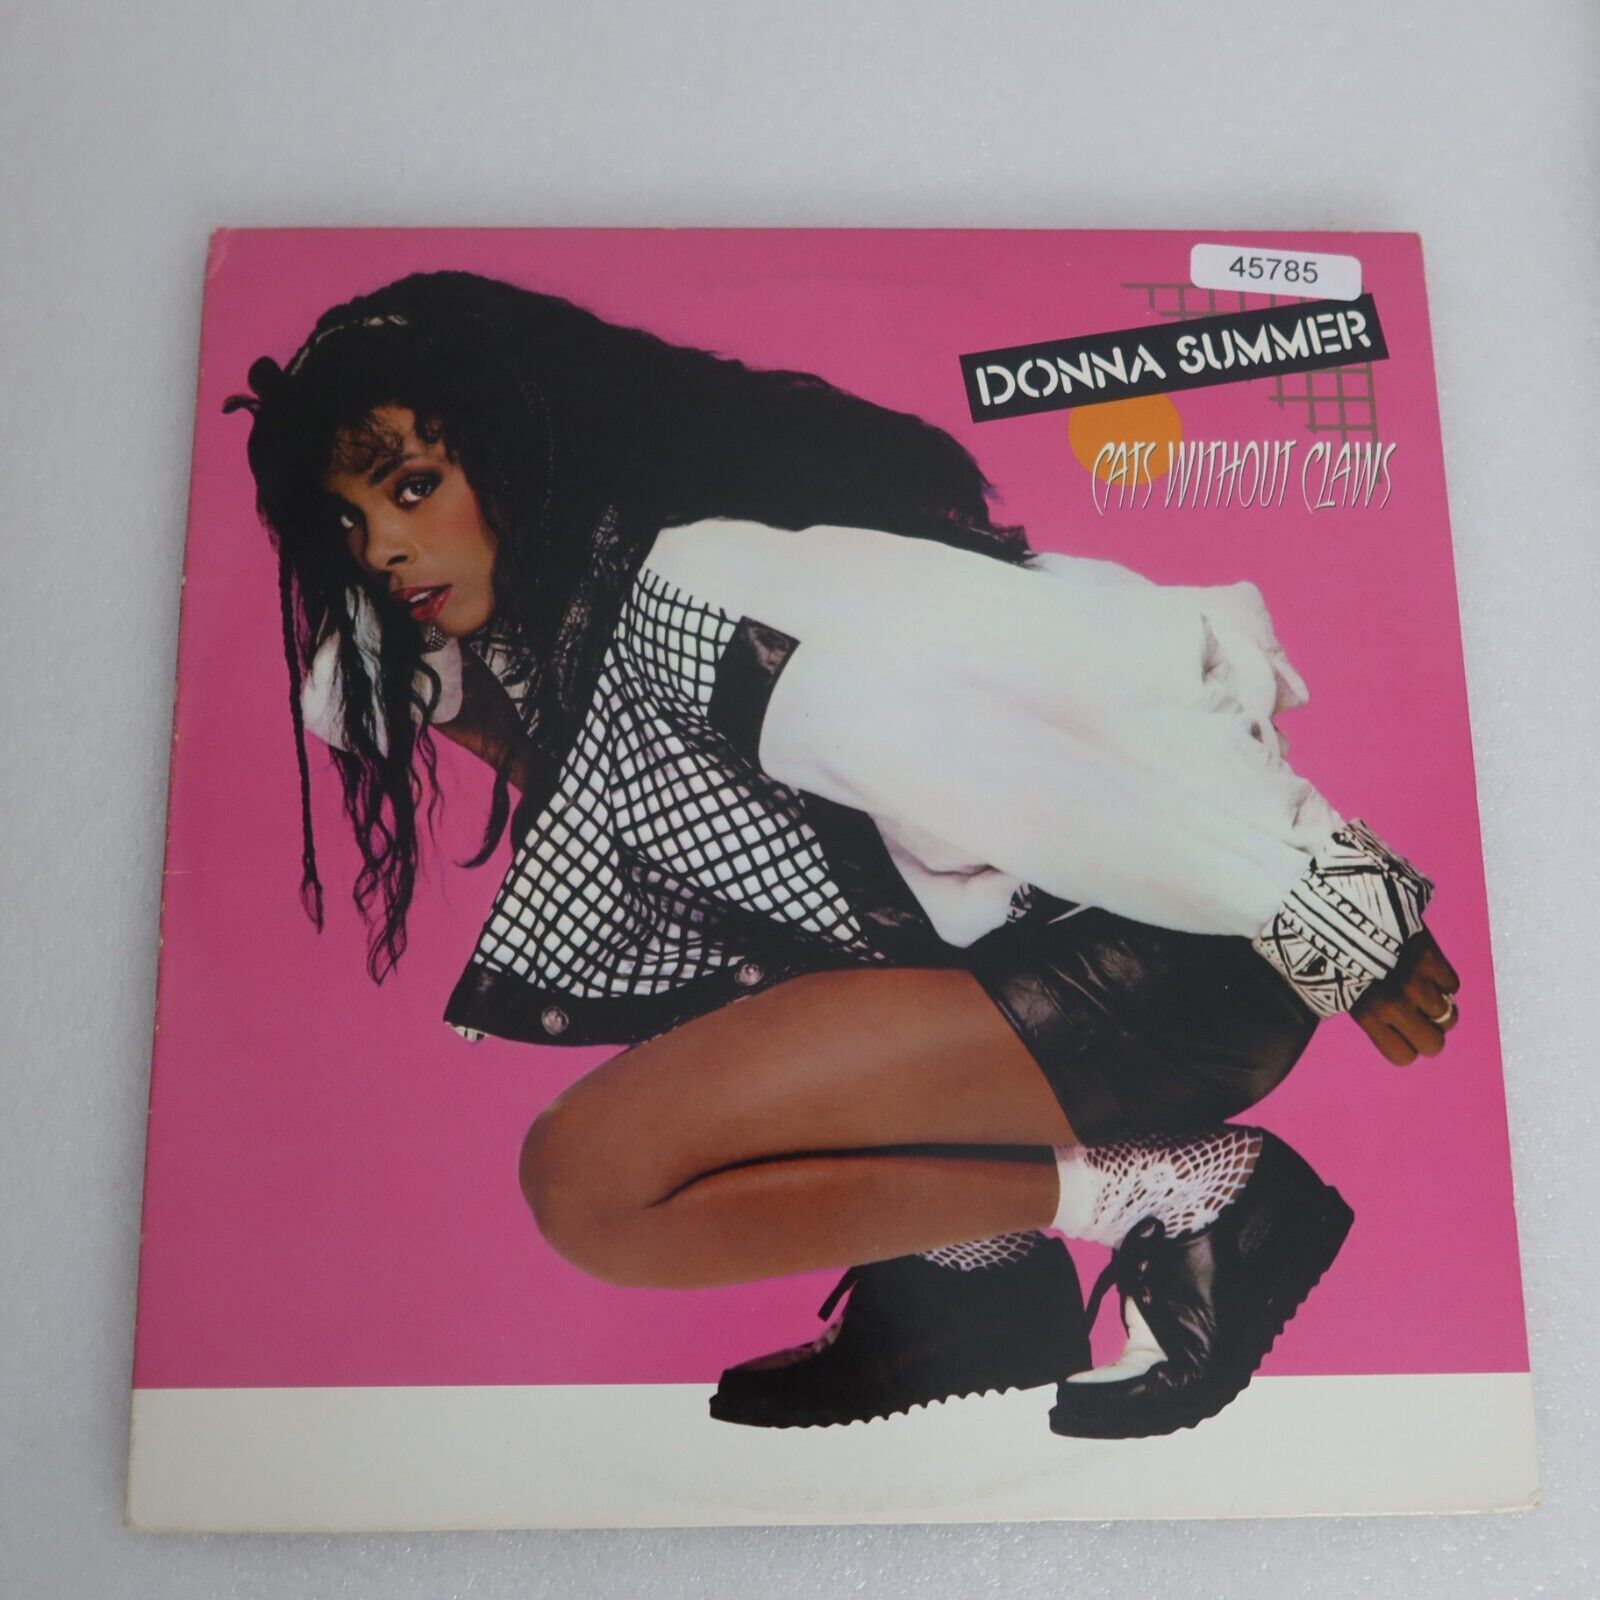 Donna Summer Cats Without Claws LP Vinyl Record Album